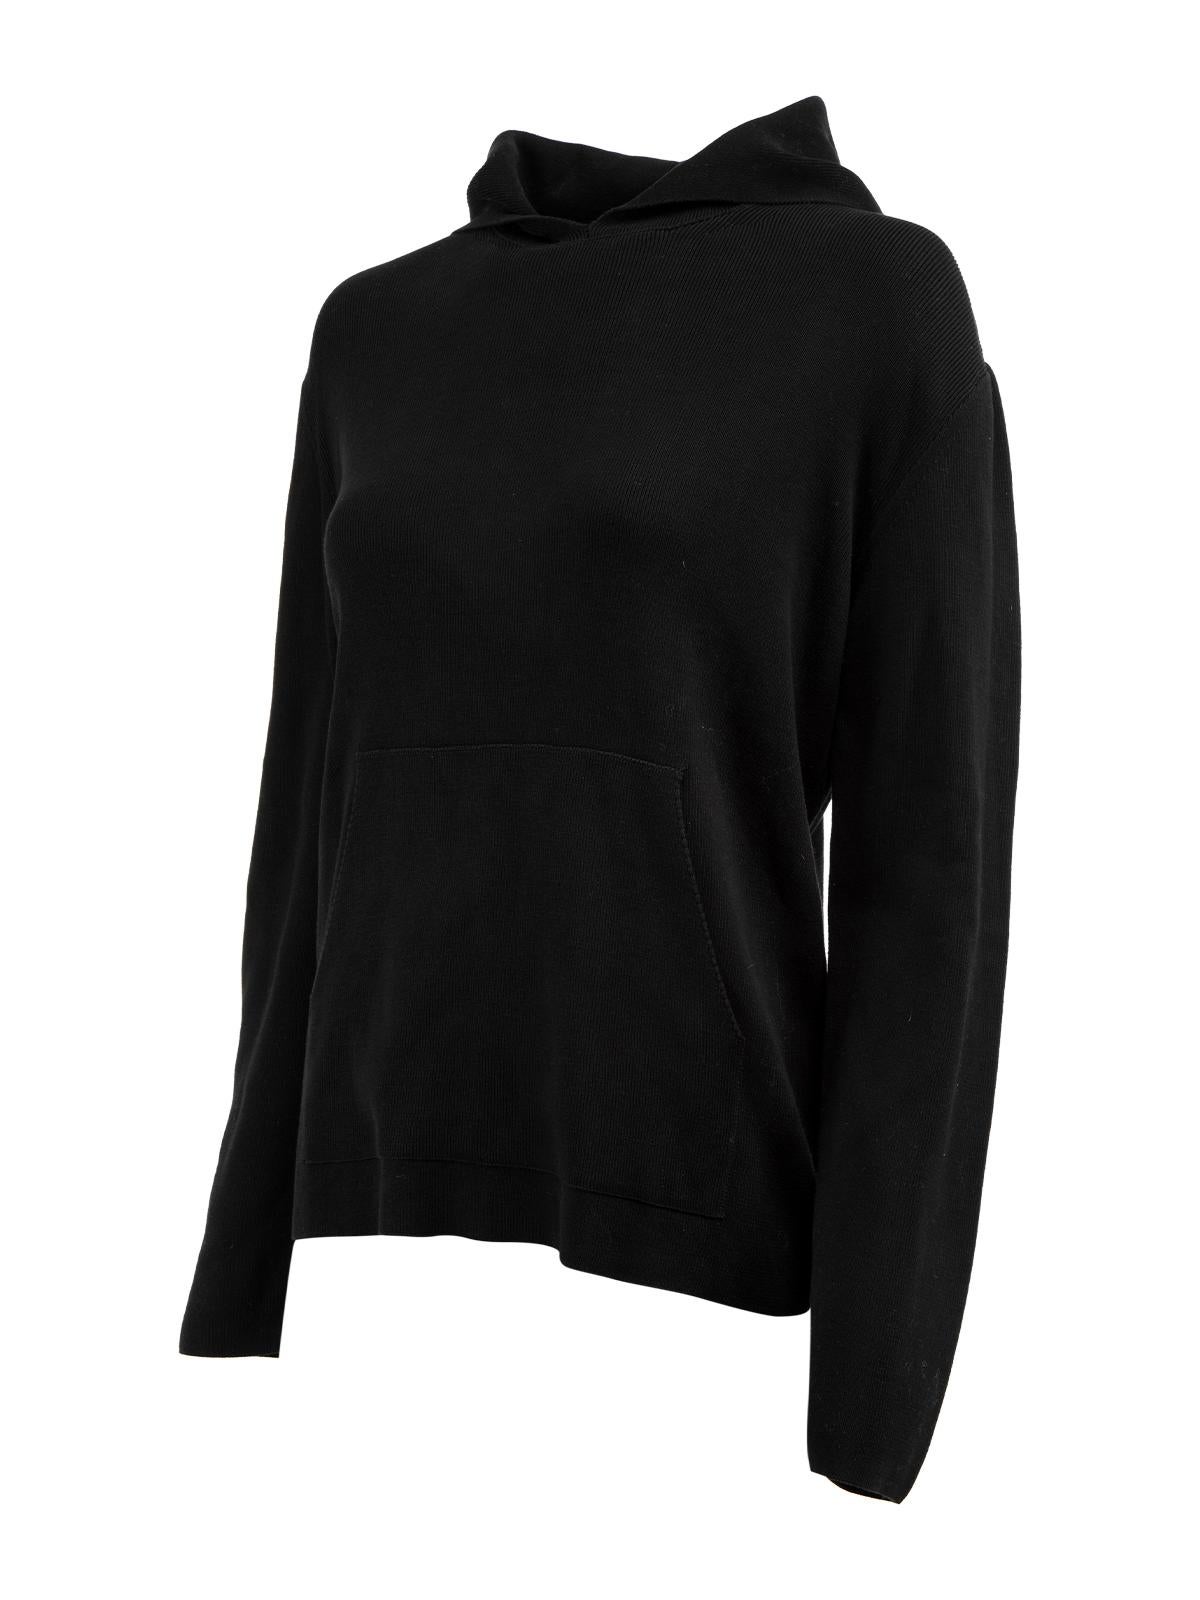 Pre-Loved Prada Women's Basic Hoodie with Long Sleeves In Excellent Condition For Sale In London, GB